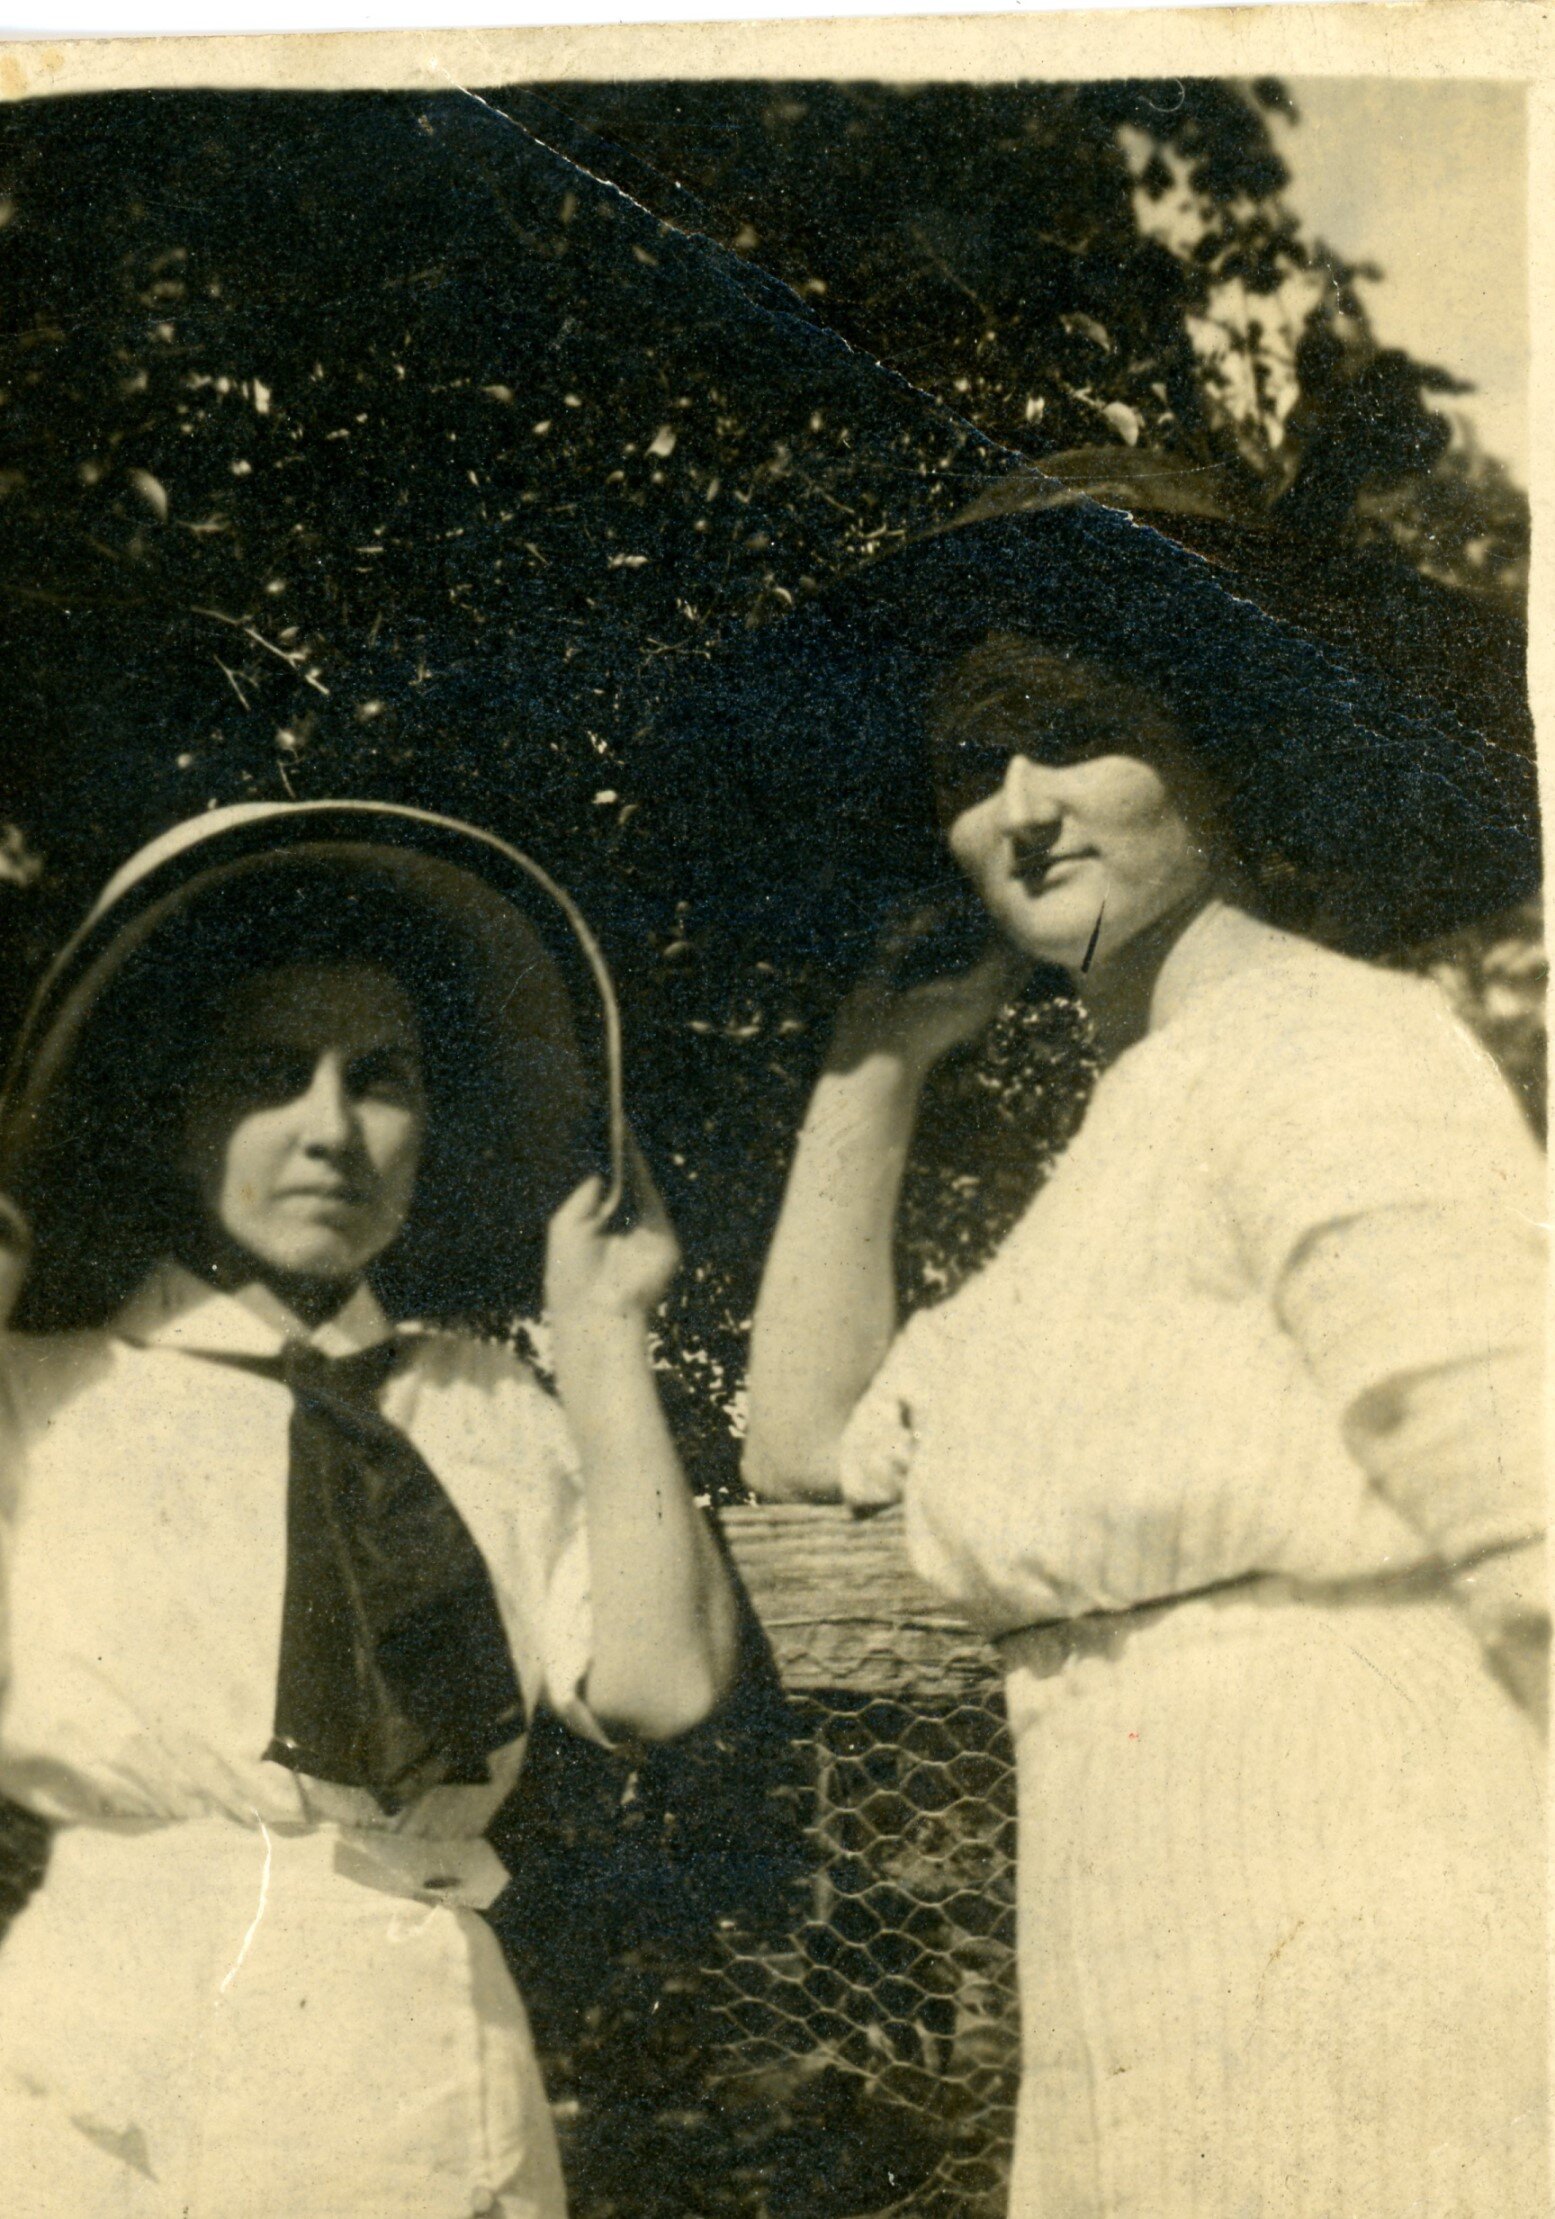 R-L: Marena Pigott and Ethel Pigott - They lived on Stewart Drive